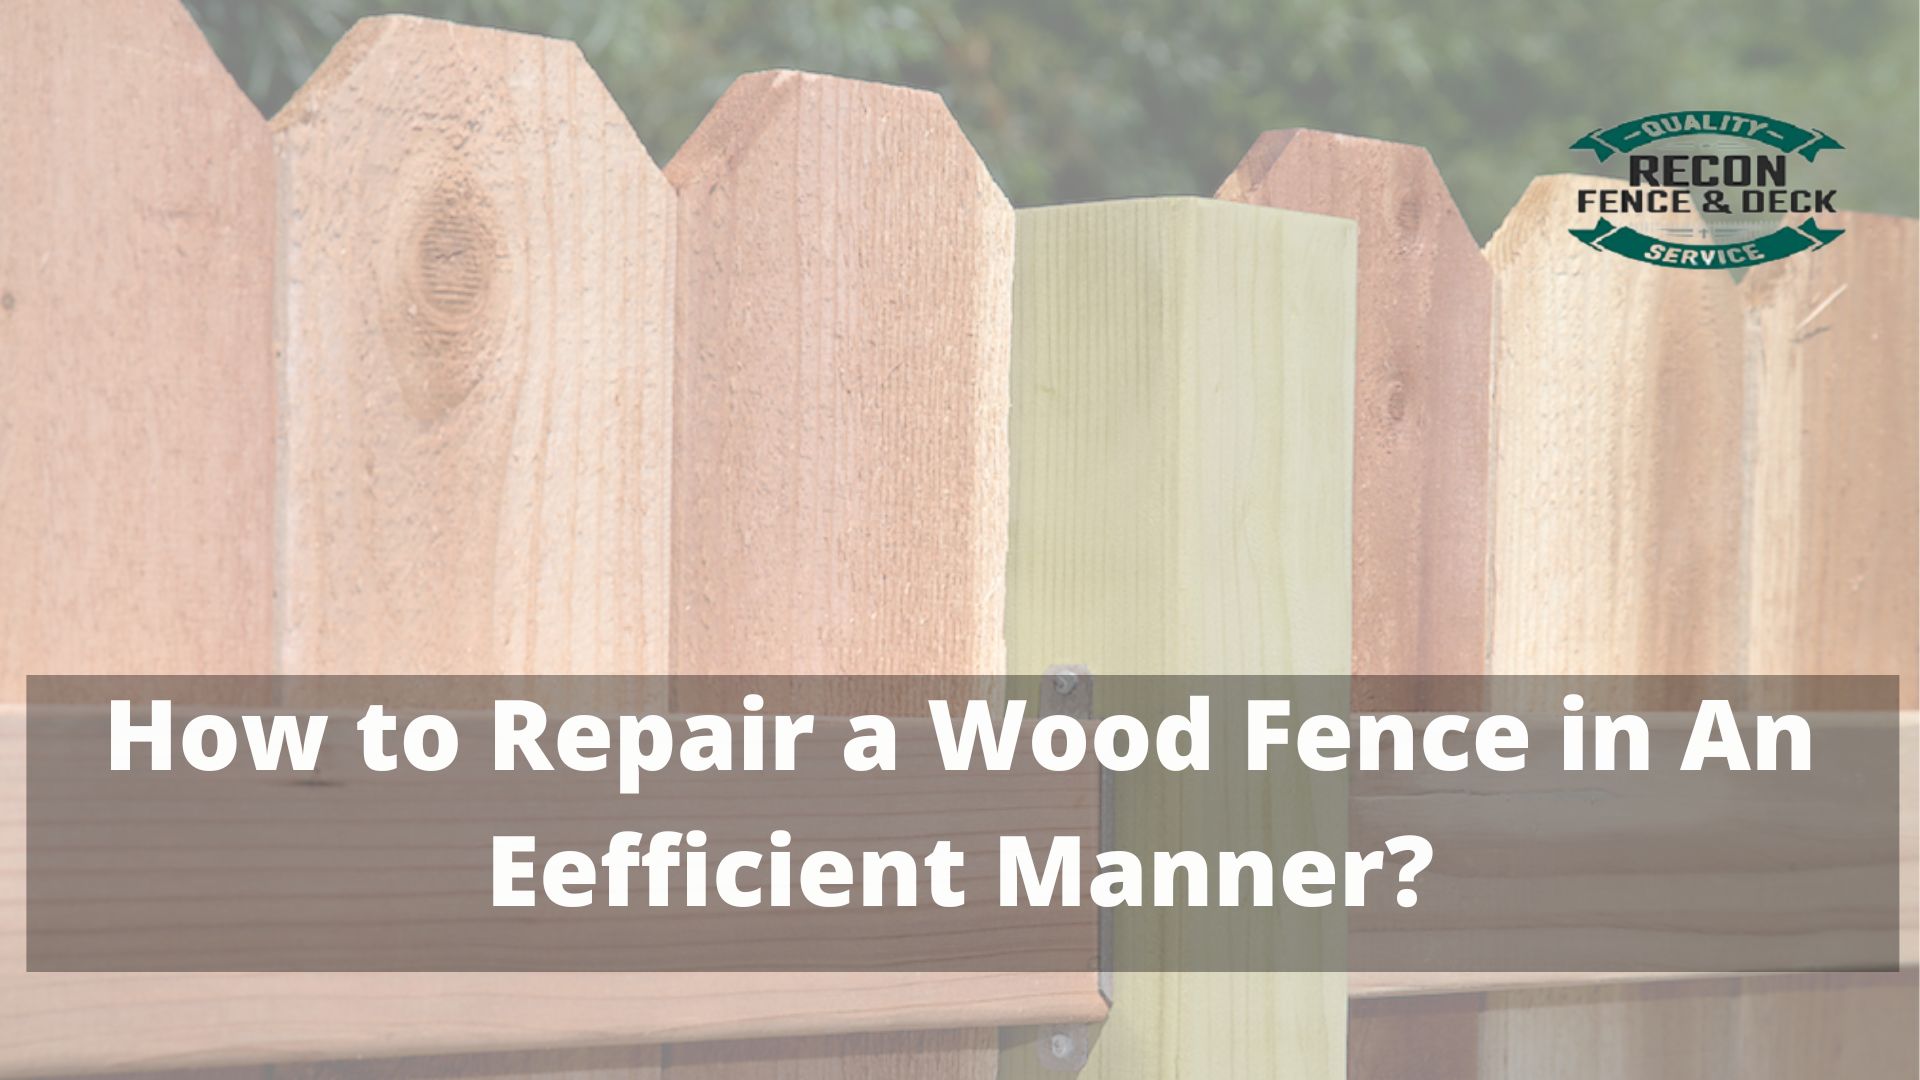 How to repair a wood fence in an efficient manner?